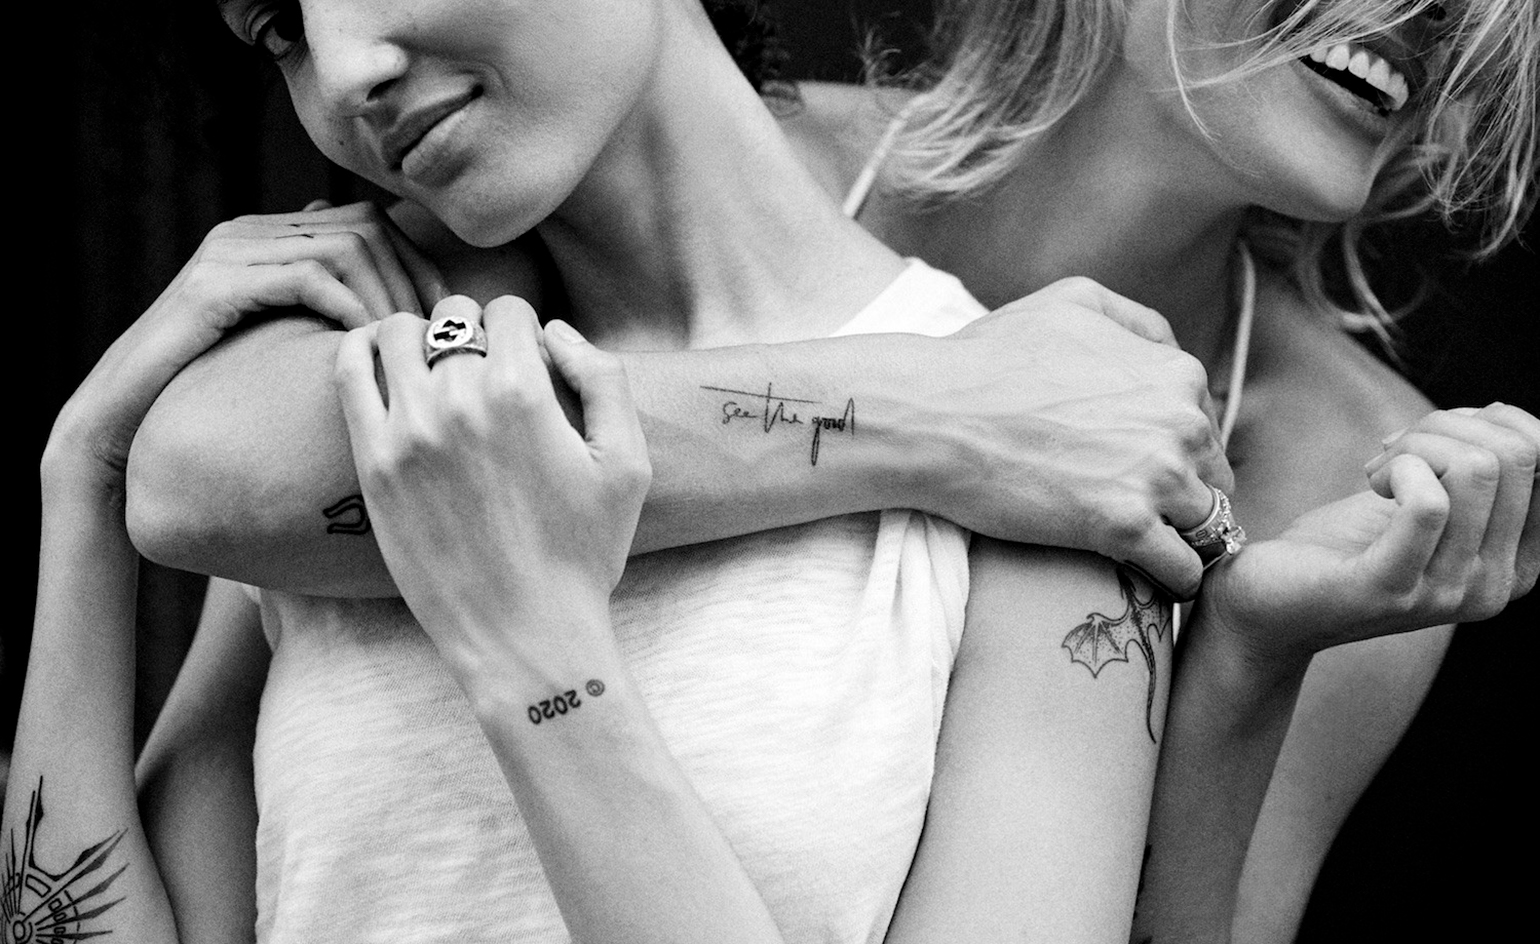 Best Meaningful Tattoo Designs for Girls | by Aries Tattoos | Medium